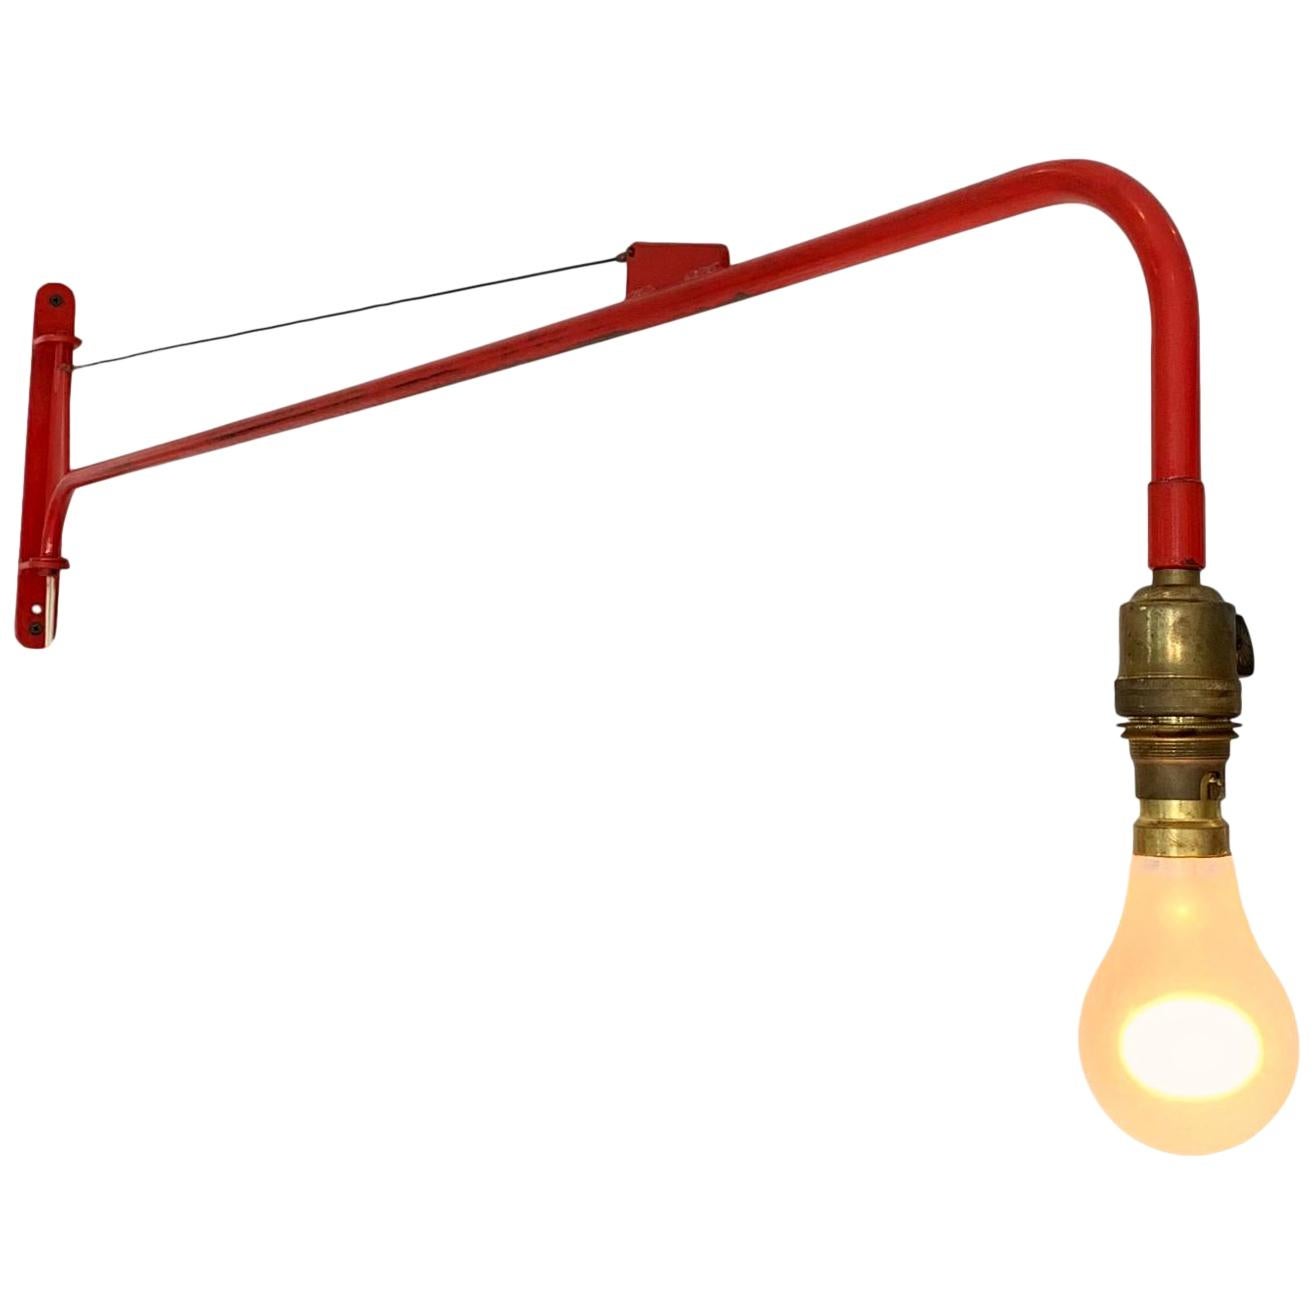 Jean Prouve Style Swing Arm Jib Sconce